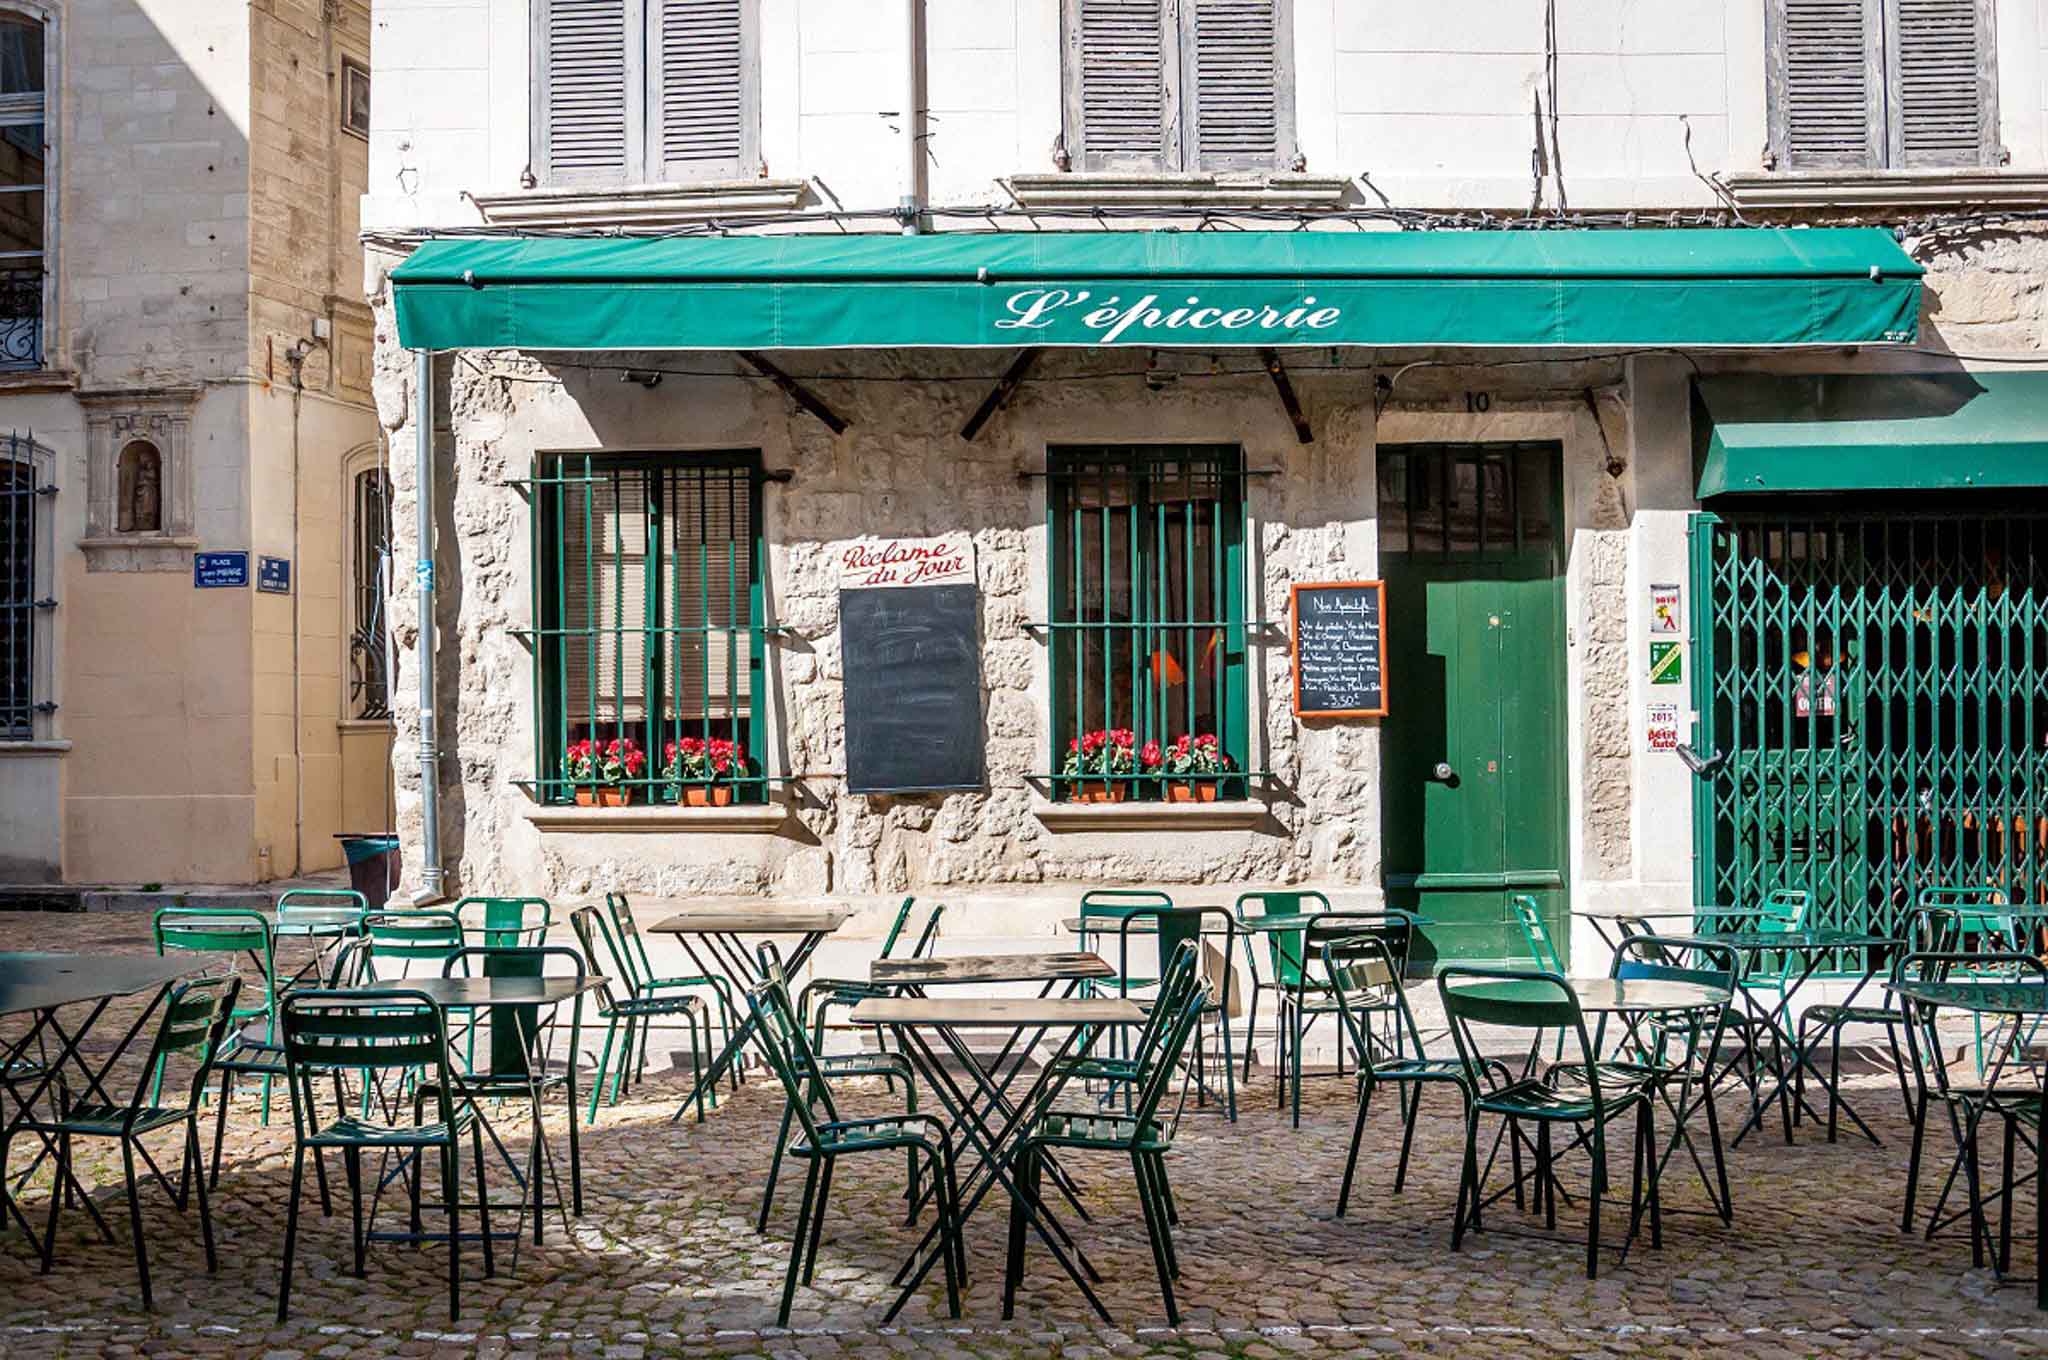 Outdoor cafe with green chairs and awning